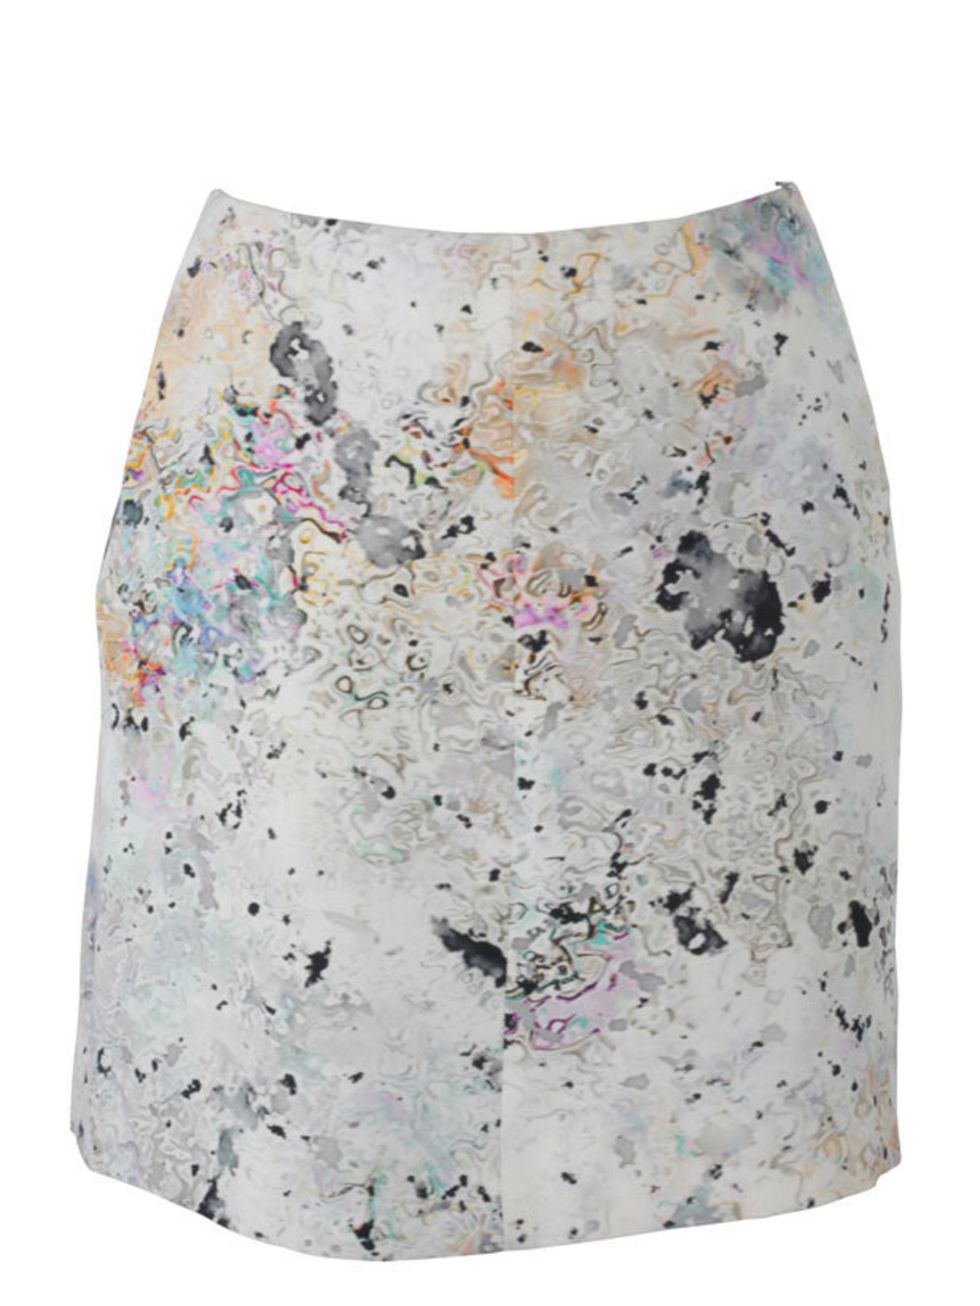 <p>Watercolour print skirt, £395.50 (was £565), by Josh Goot at <a href="http://www.liberty.co.uk/fcp/product/Liberty//Watercolour-Print-Skirt,--Josh-Goot/27390">Liberty</a> </p>